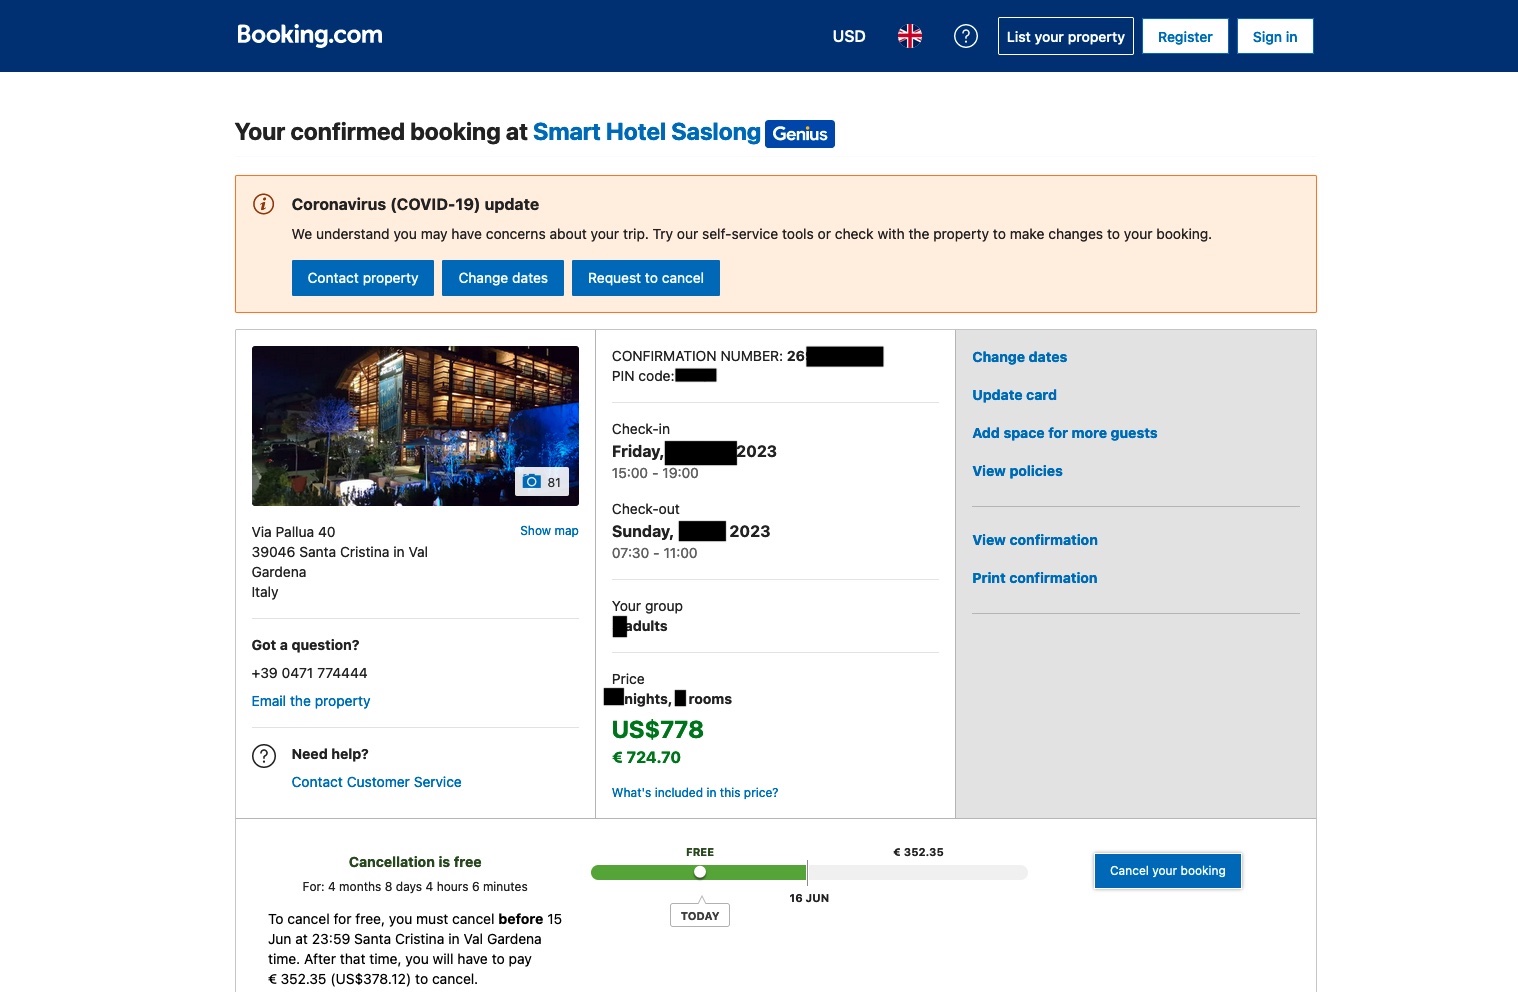 imod græs skranke Mysterious leak of Booking.com reservation data is being used to scam  customers | Ars Technica